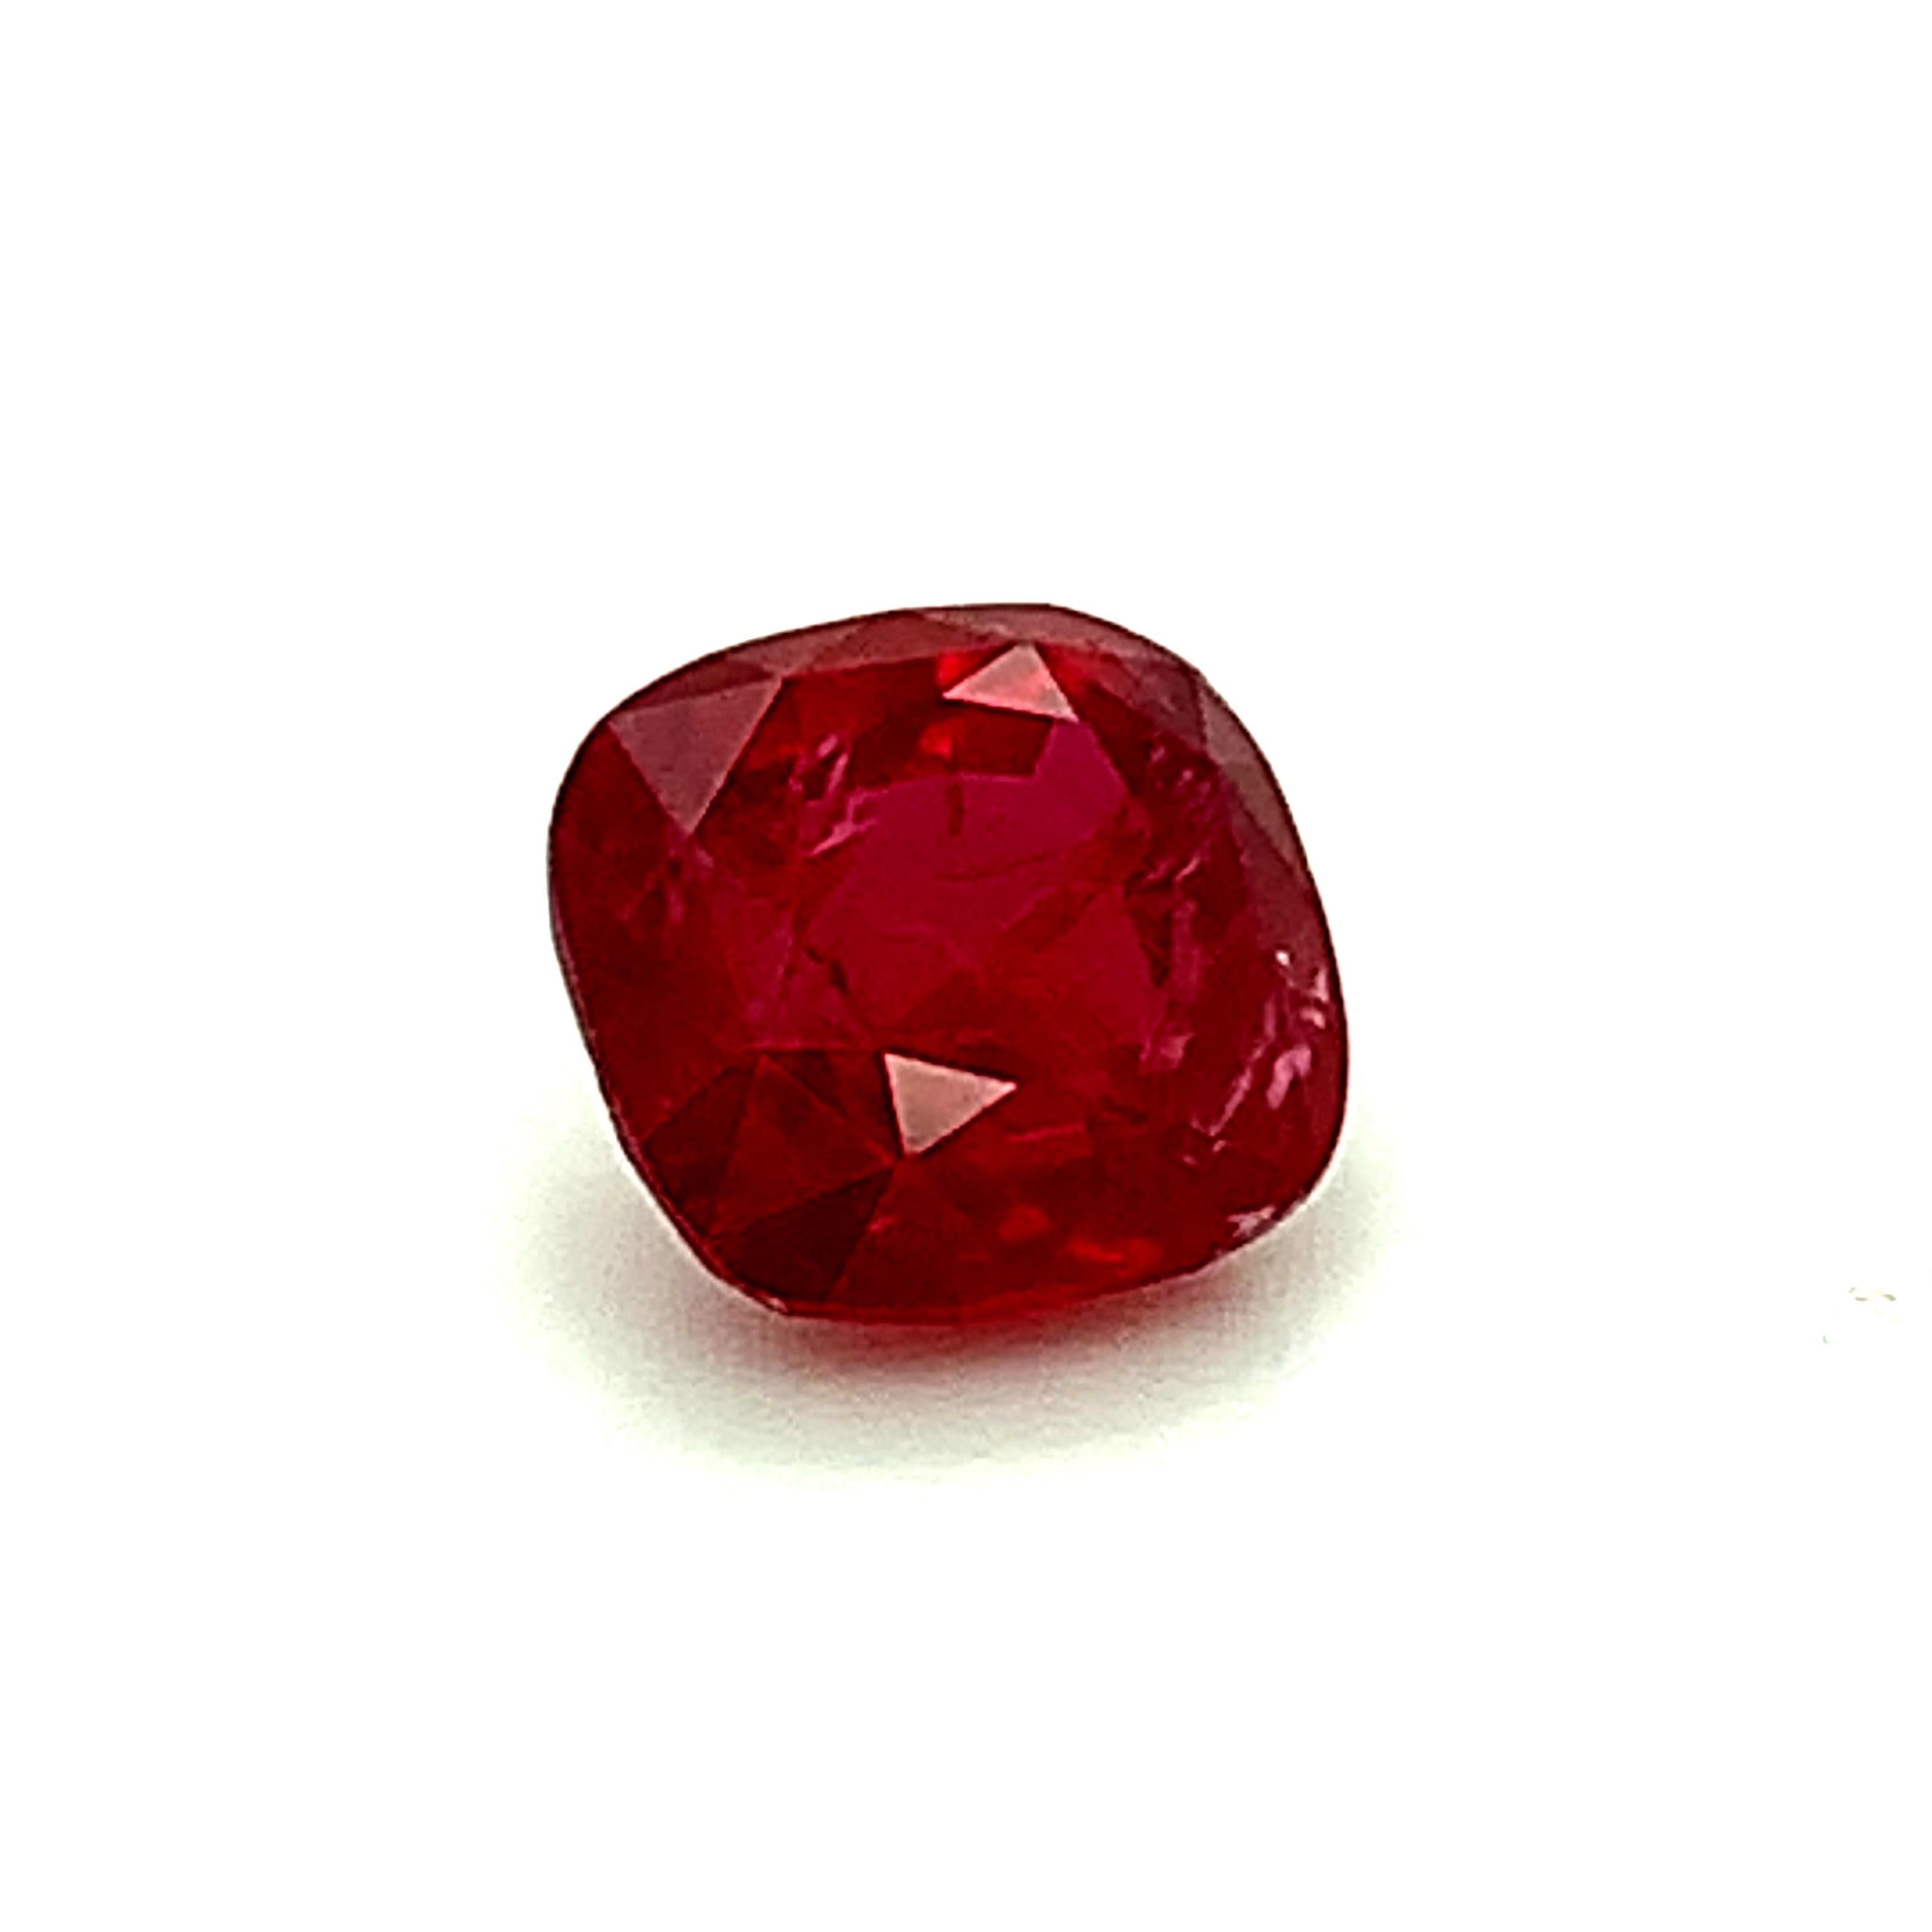 Cushion Cut Unheated 3.53 Carat “Pigeon’s Blood” Ruby, GIA Certified